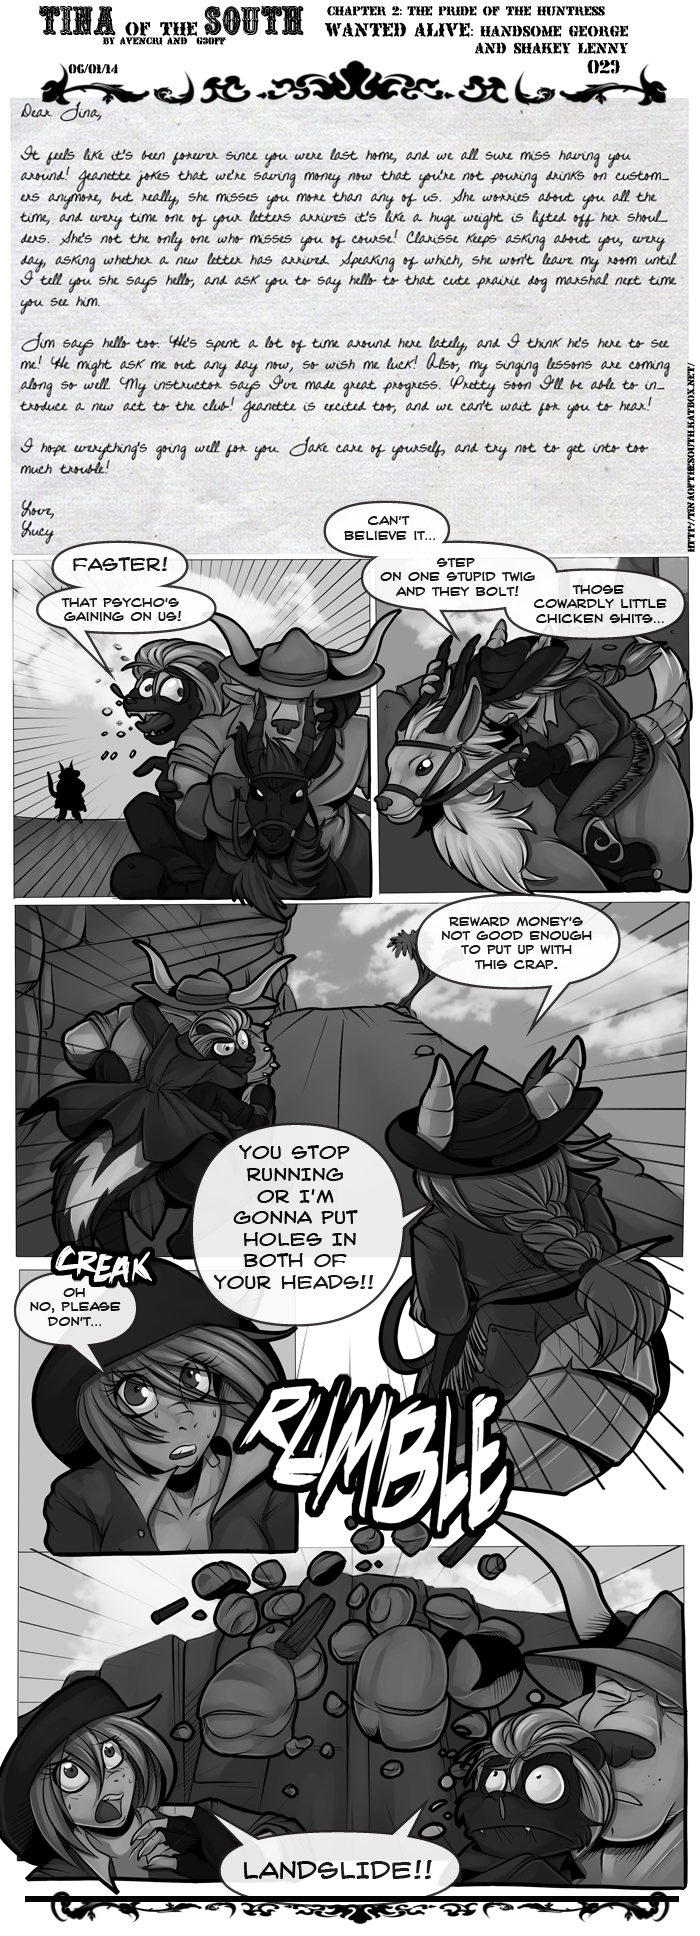 Tina of the South Ch2 Pg1